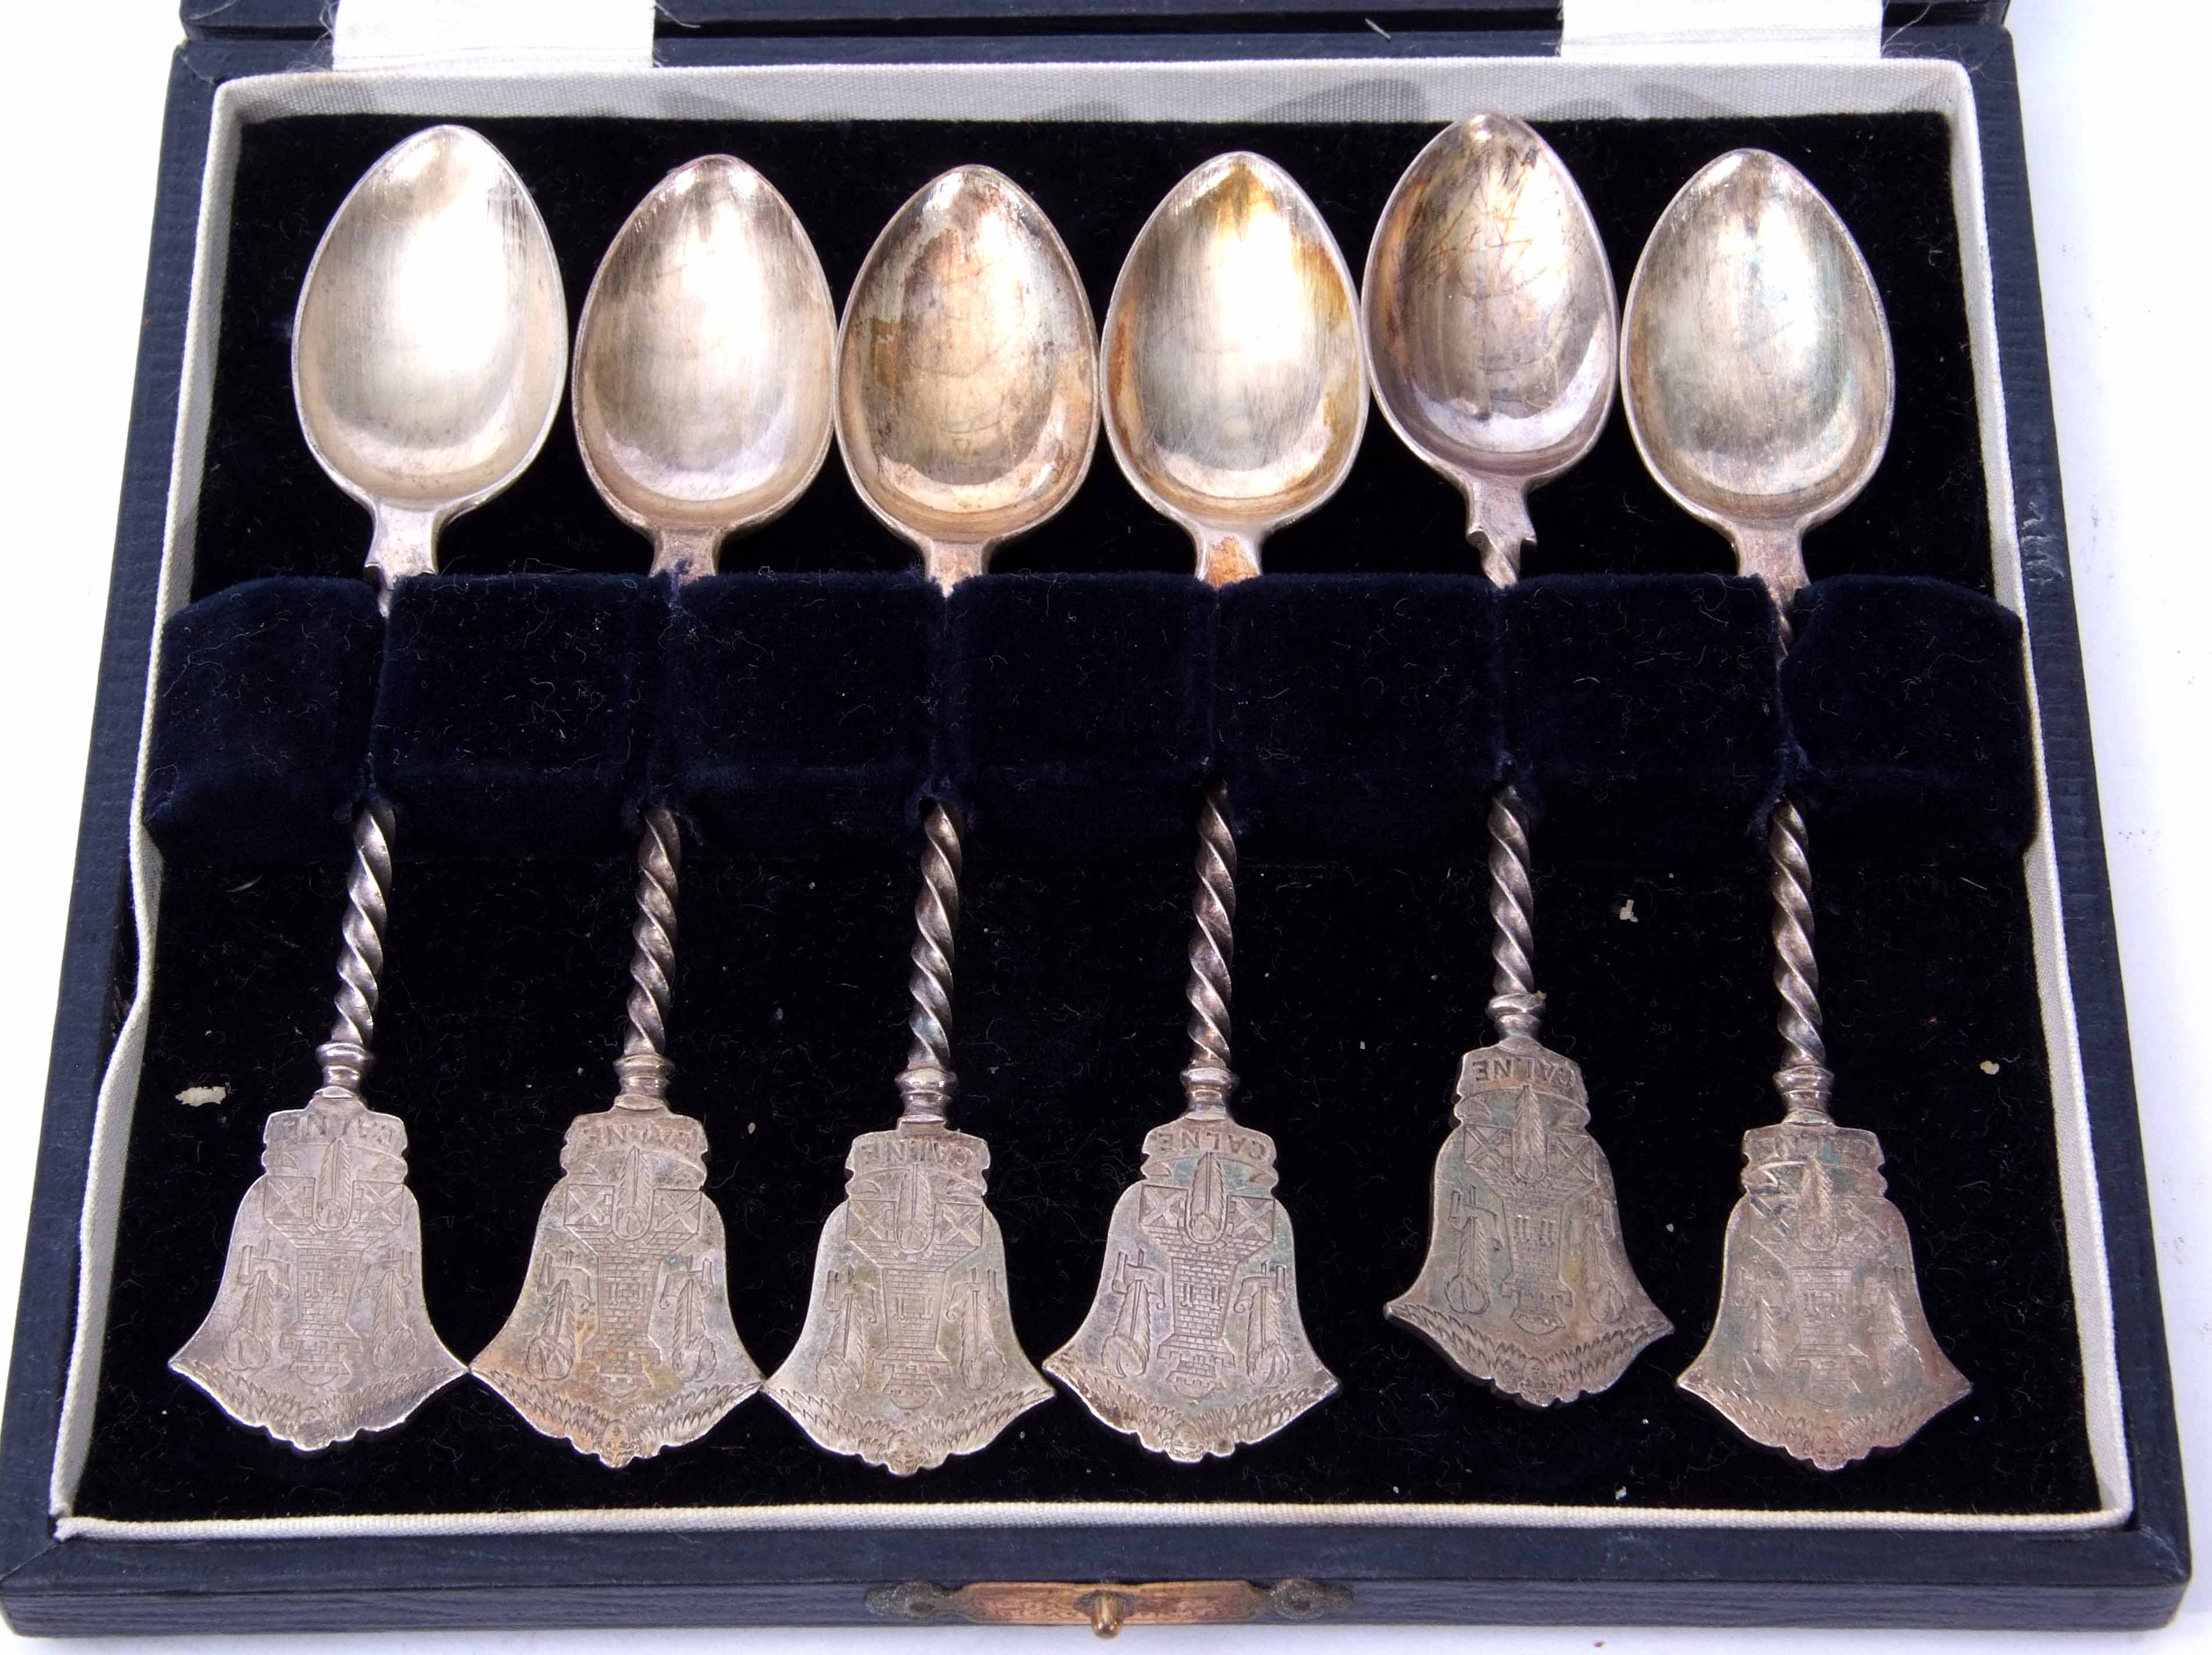 Cased set of six Edward VII tea spoons, each with twisted stems and shield shaped finials with